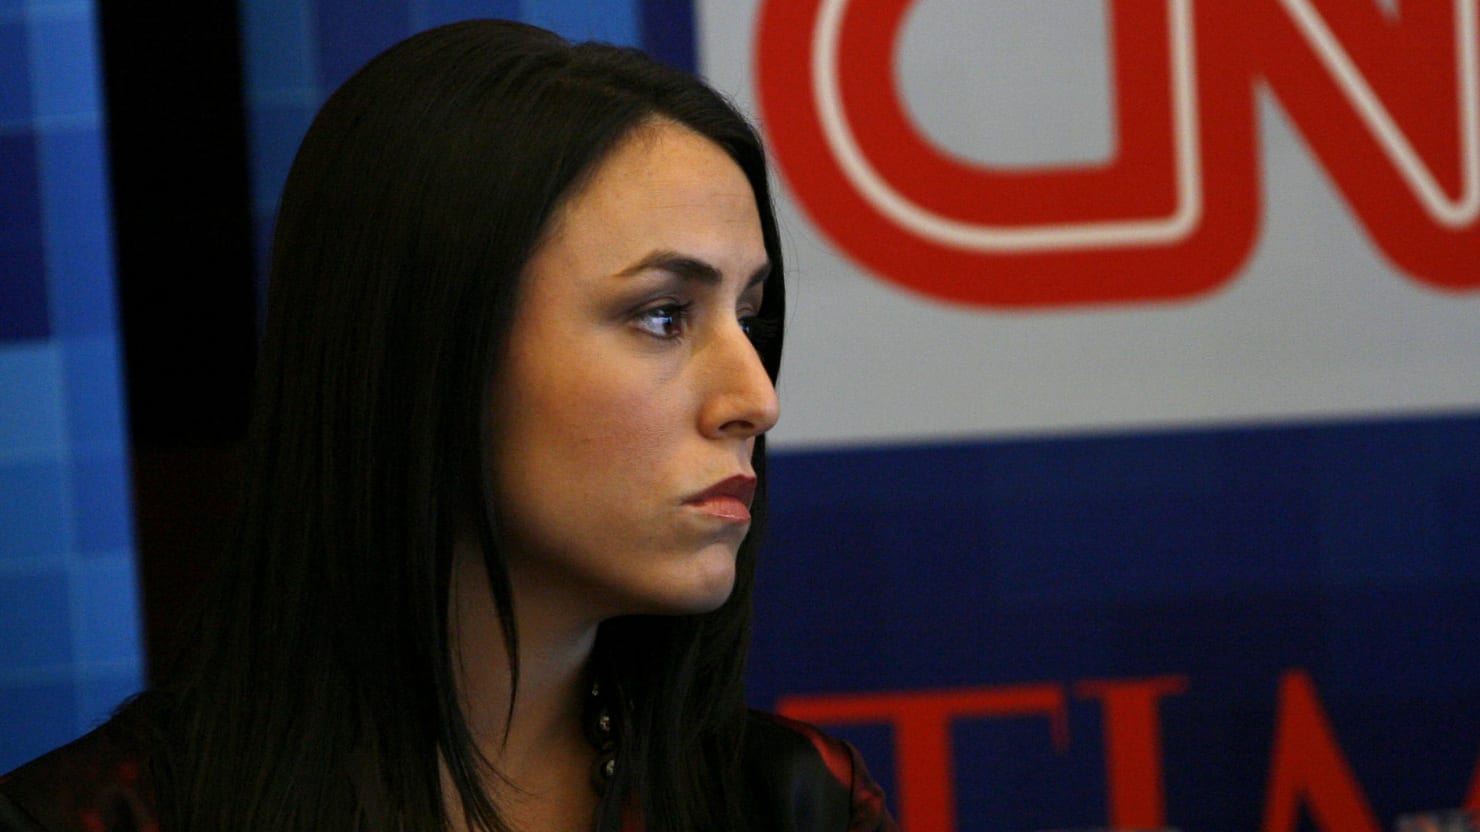 Andrea Tantaros's Therapist Backs Her Sex Harassment Claim Against